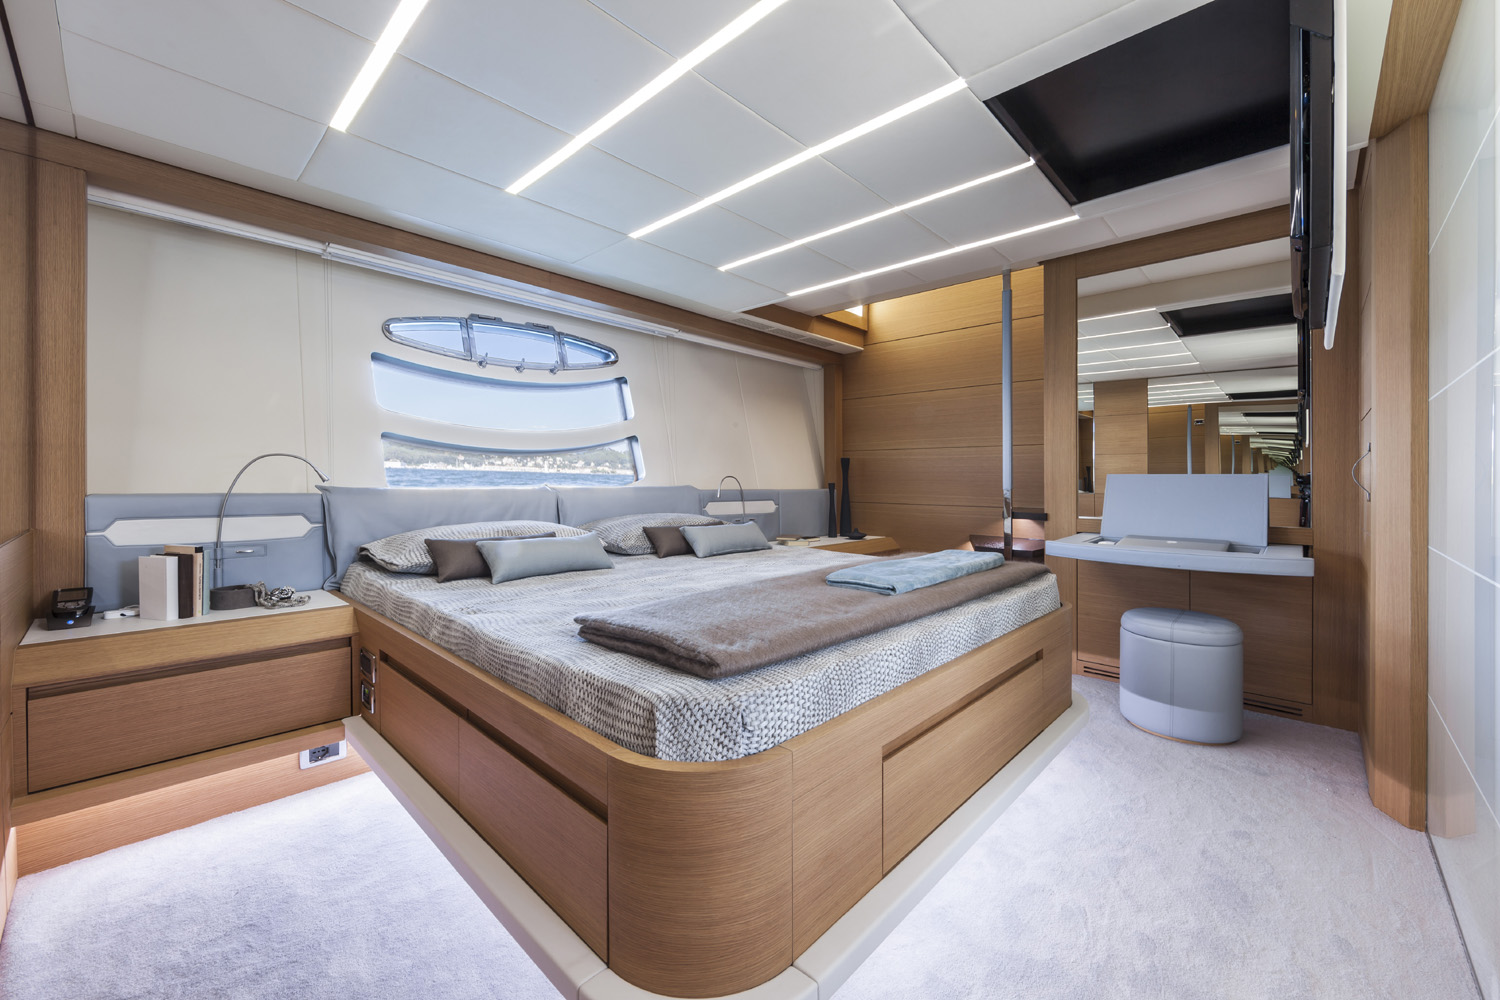 Master Cabin of the Pershing 82’ motor yacht